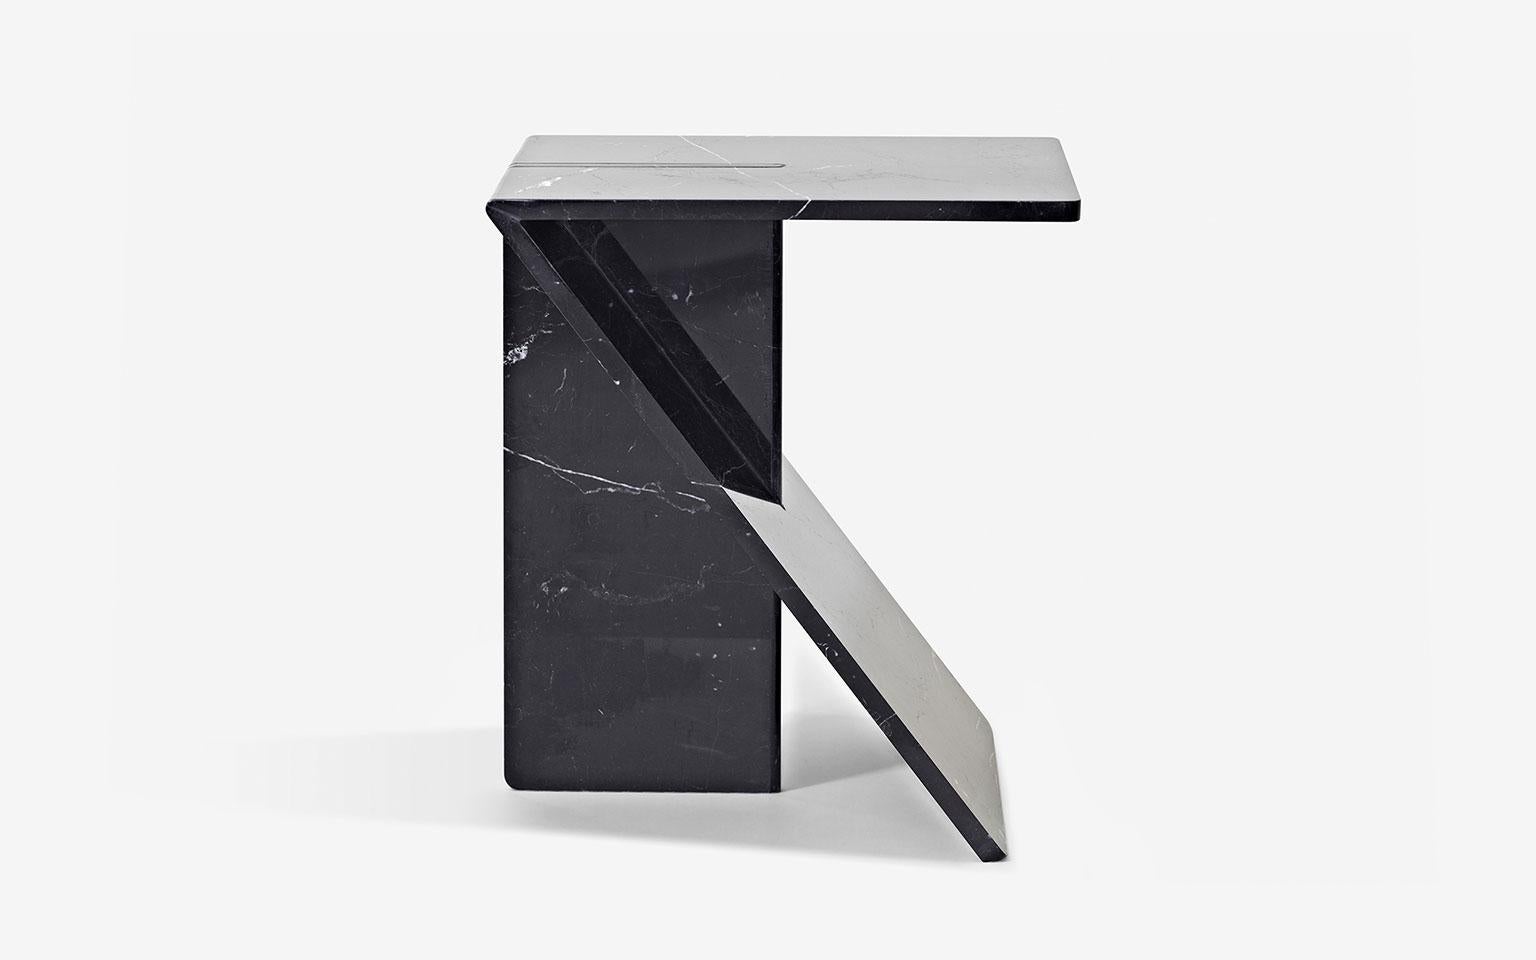 The architecture of the minimum. The perfect compromise between the mass of matter used and the economy of means used to make it. Clé is a side table available in white Carrara or black Marquina marble.

Clé is part of the Feather Light Marble